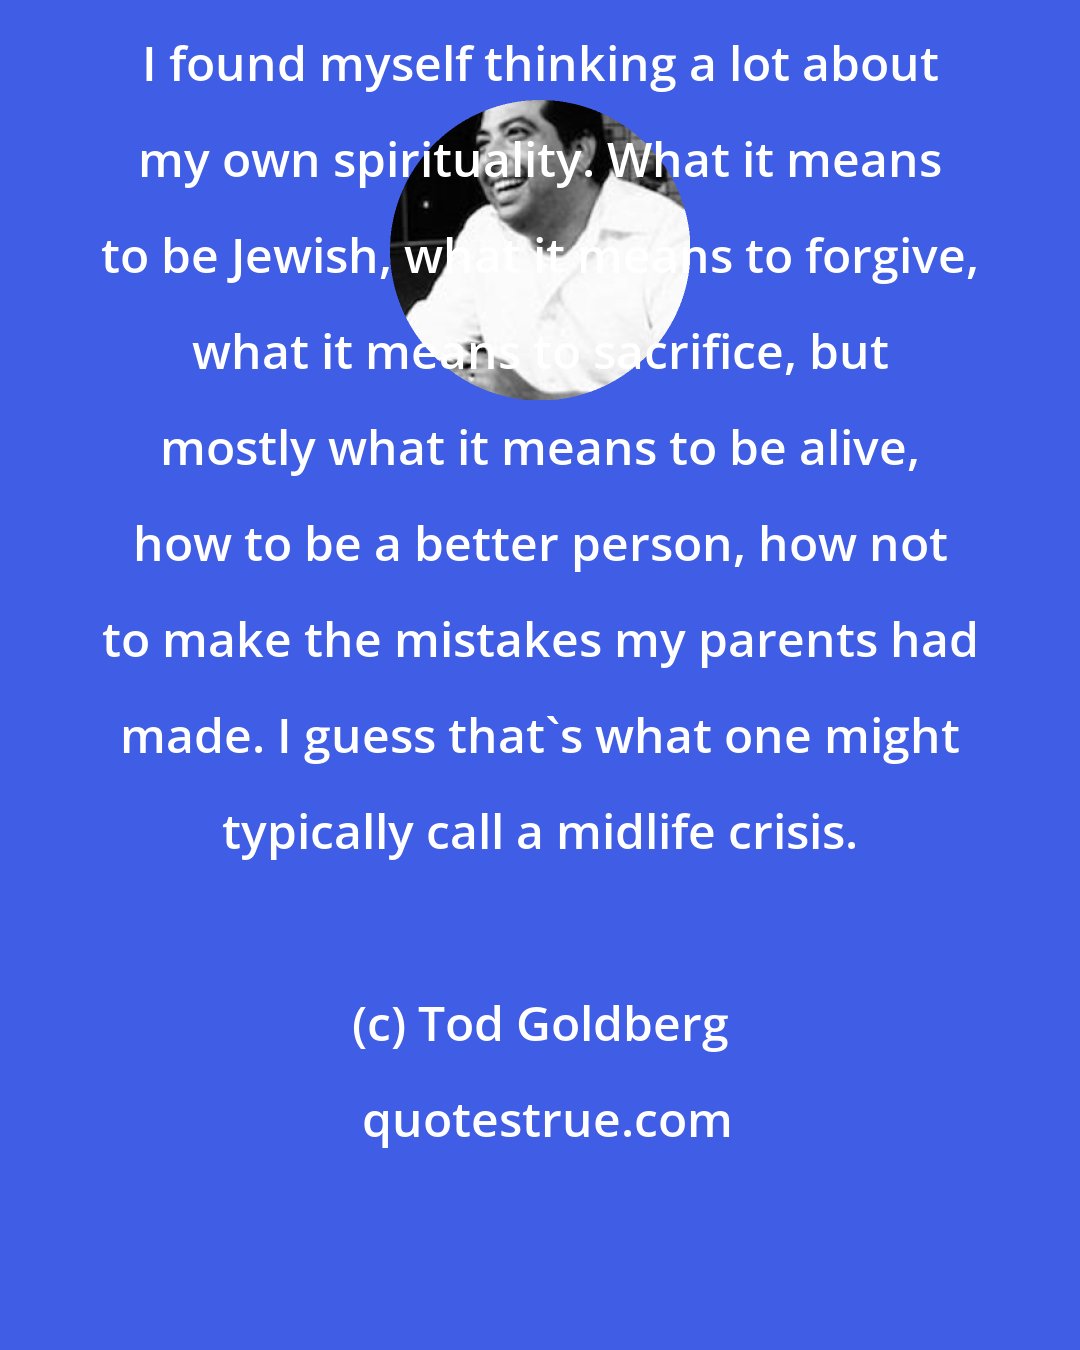 Tod Goldberg: I found myself thinking a lot about my own spirituality. What it means to be Jewish, what it means to forgive, what it means to sacrifice, but mostly what it means to be alive, how to be a better person, how not to make the mistakes my parents had made. I guess that's what one might typically call a midlife crisis.